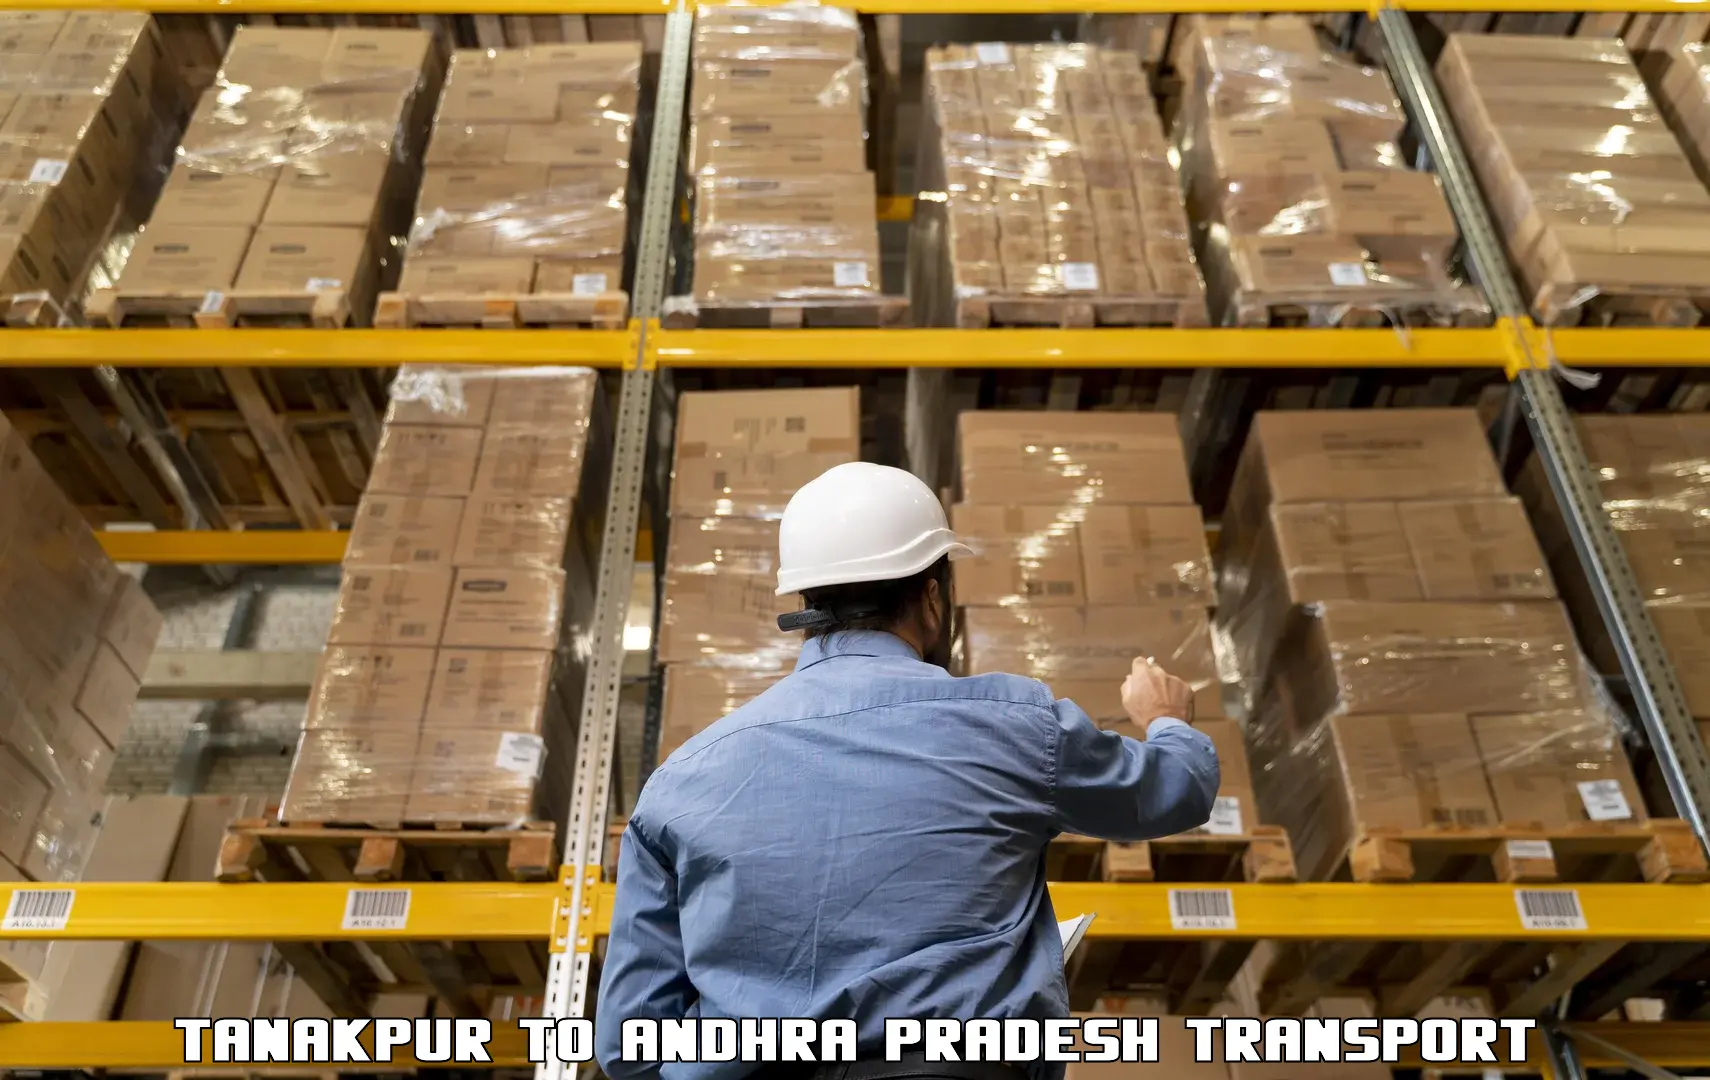 Air freight transport services Tanakpur to Visakhapatnam Port